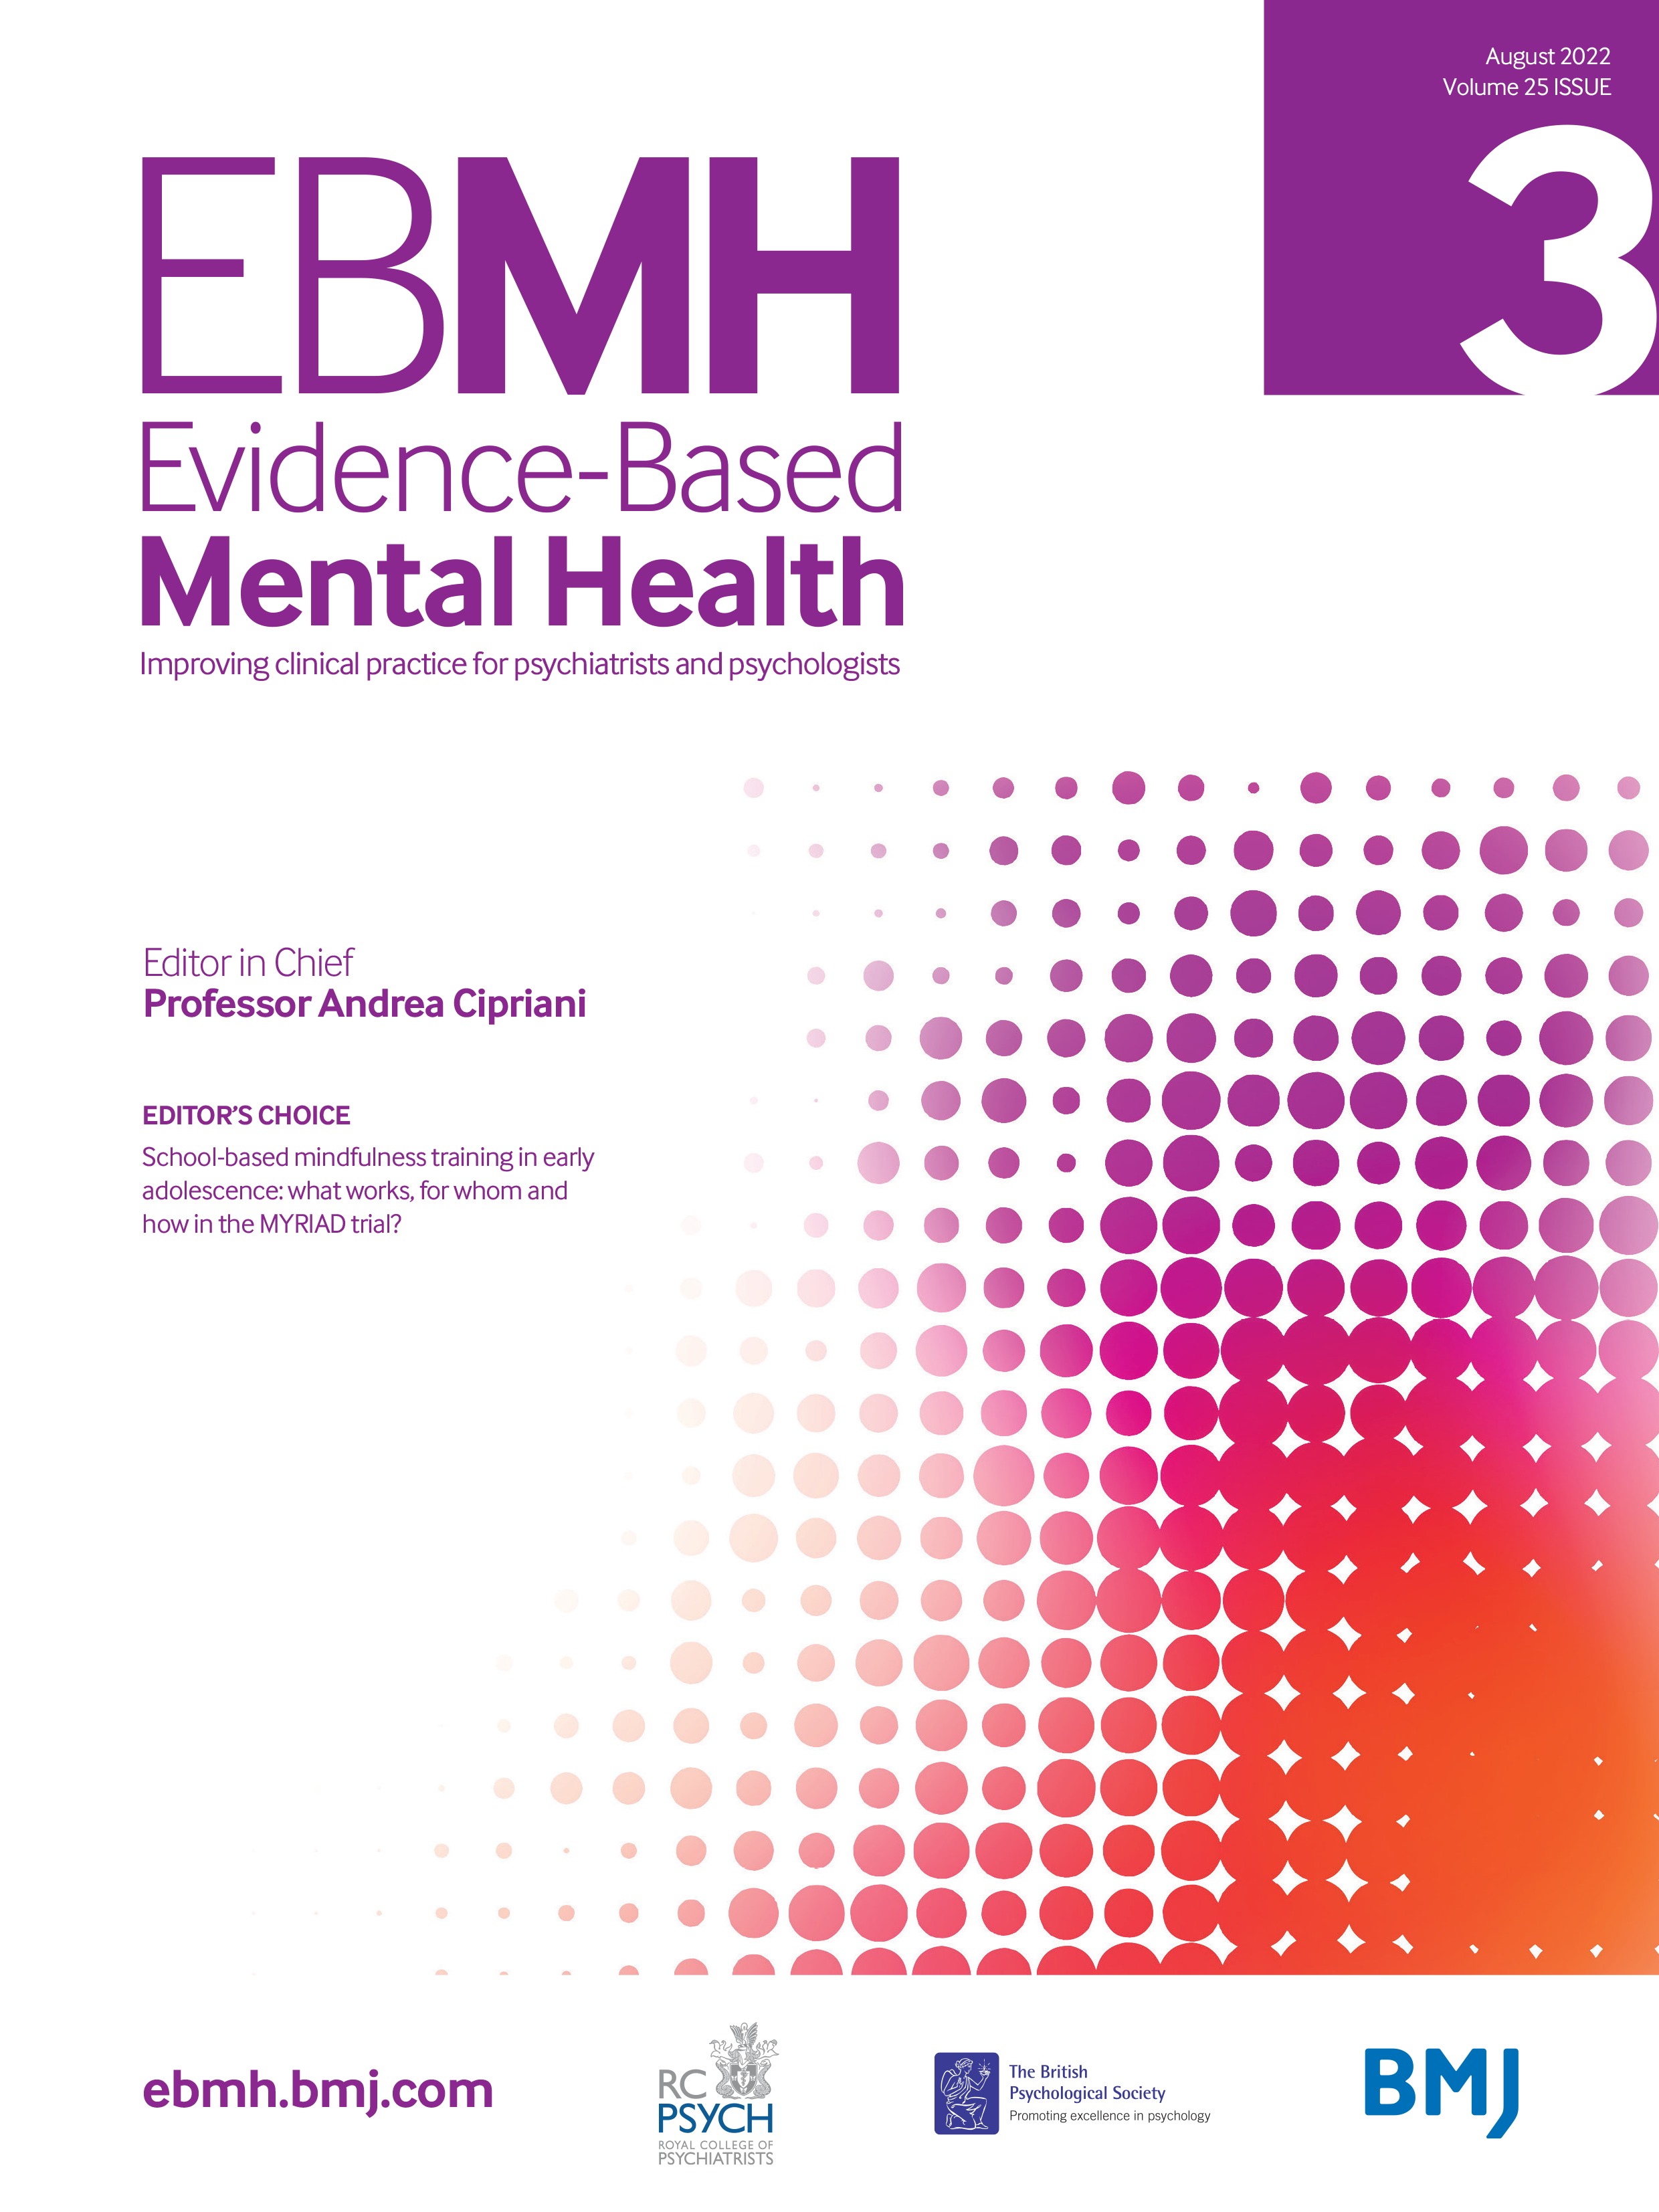 Effectiveness of universal school-based mindfulness training compared with normal school provision on teacher mental health and school climate: results of the MYRIAD cluster randomised controlled trial